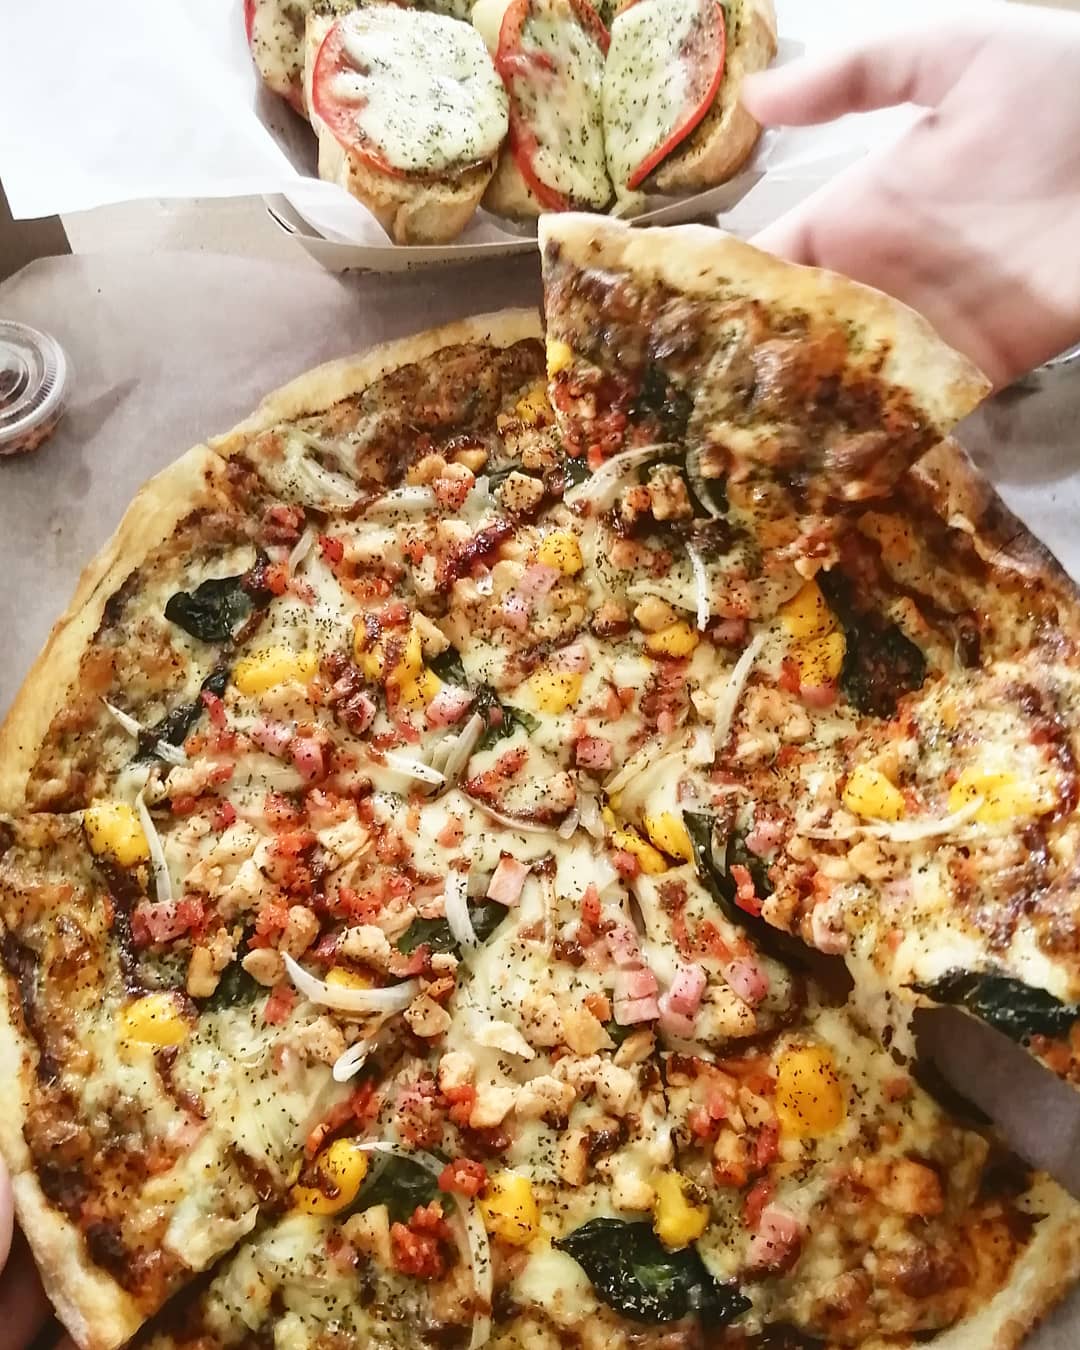 Pizza Mamamas (8 slices)